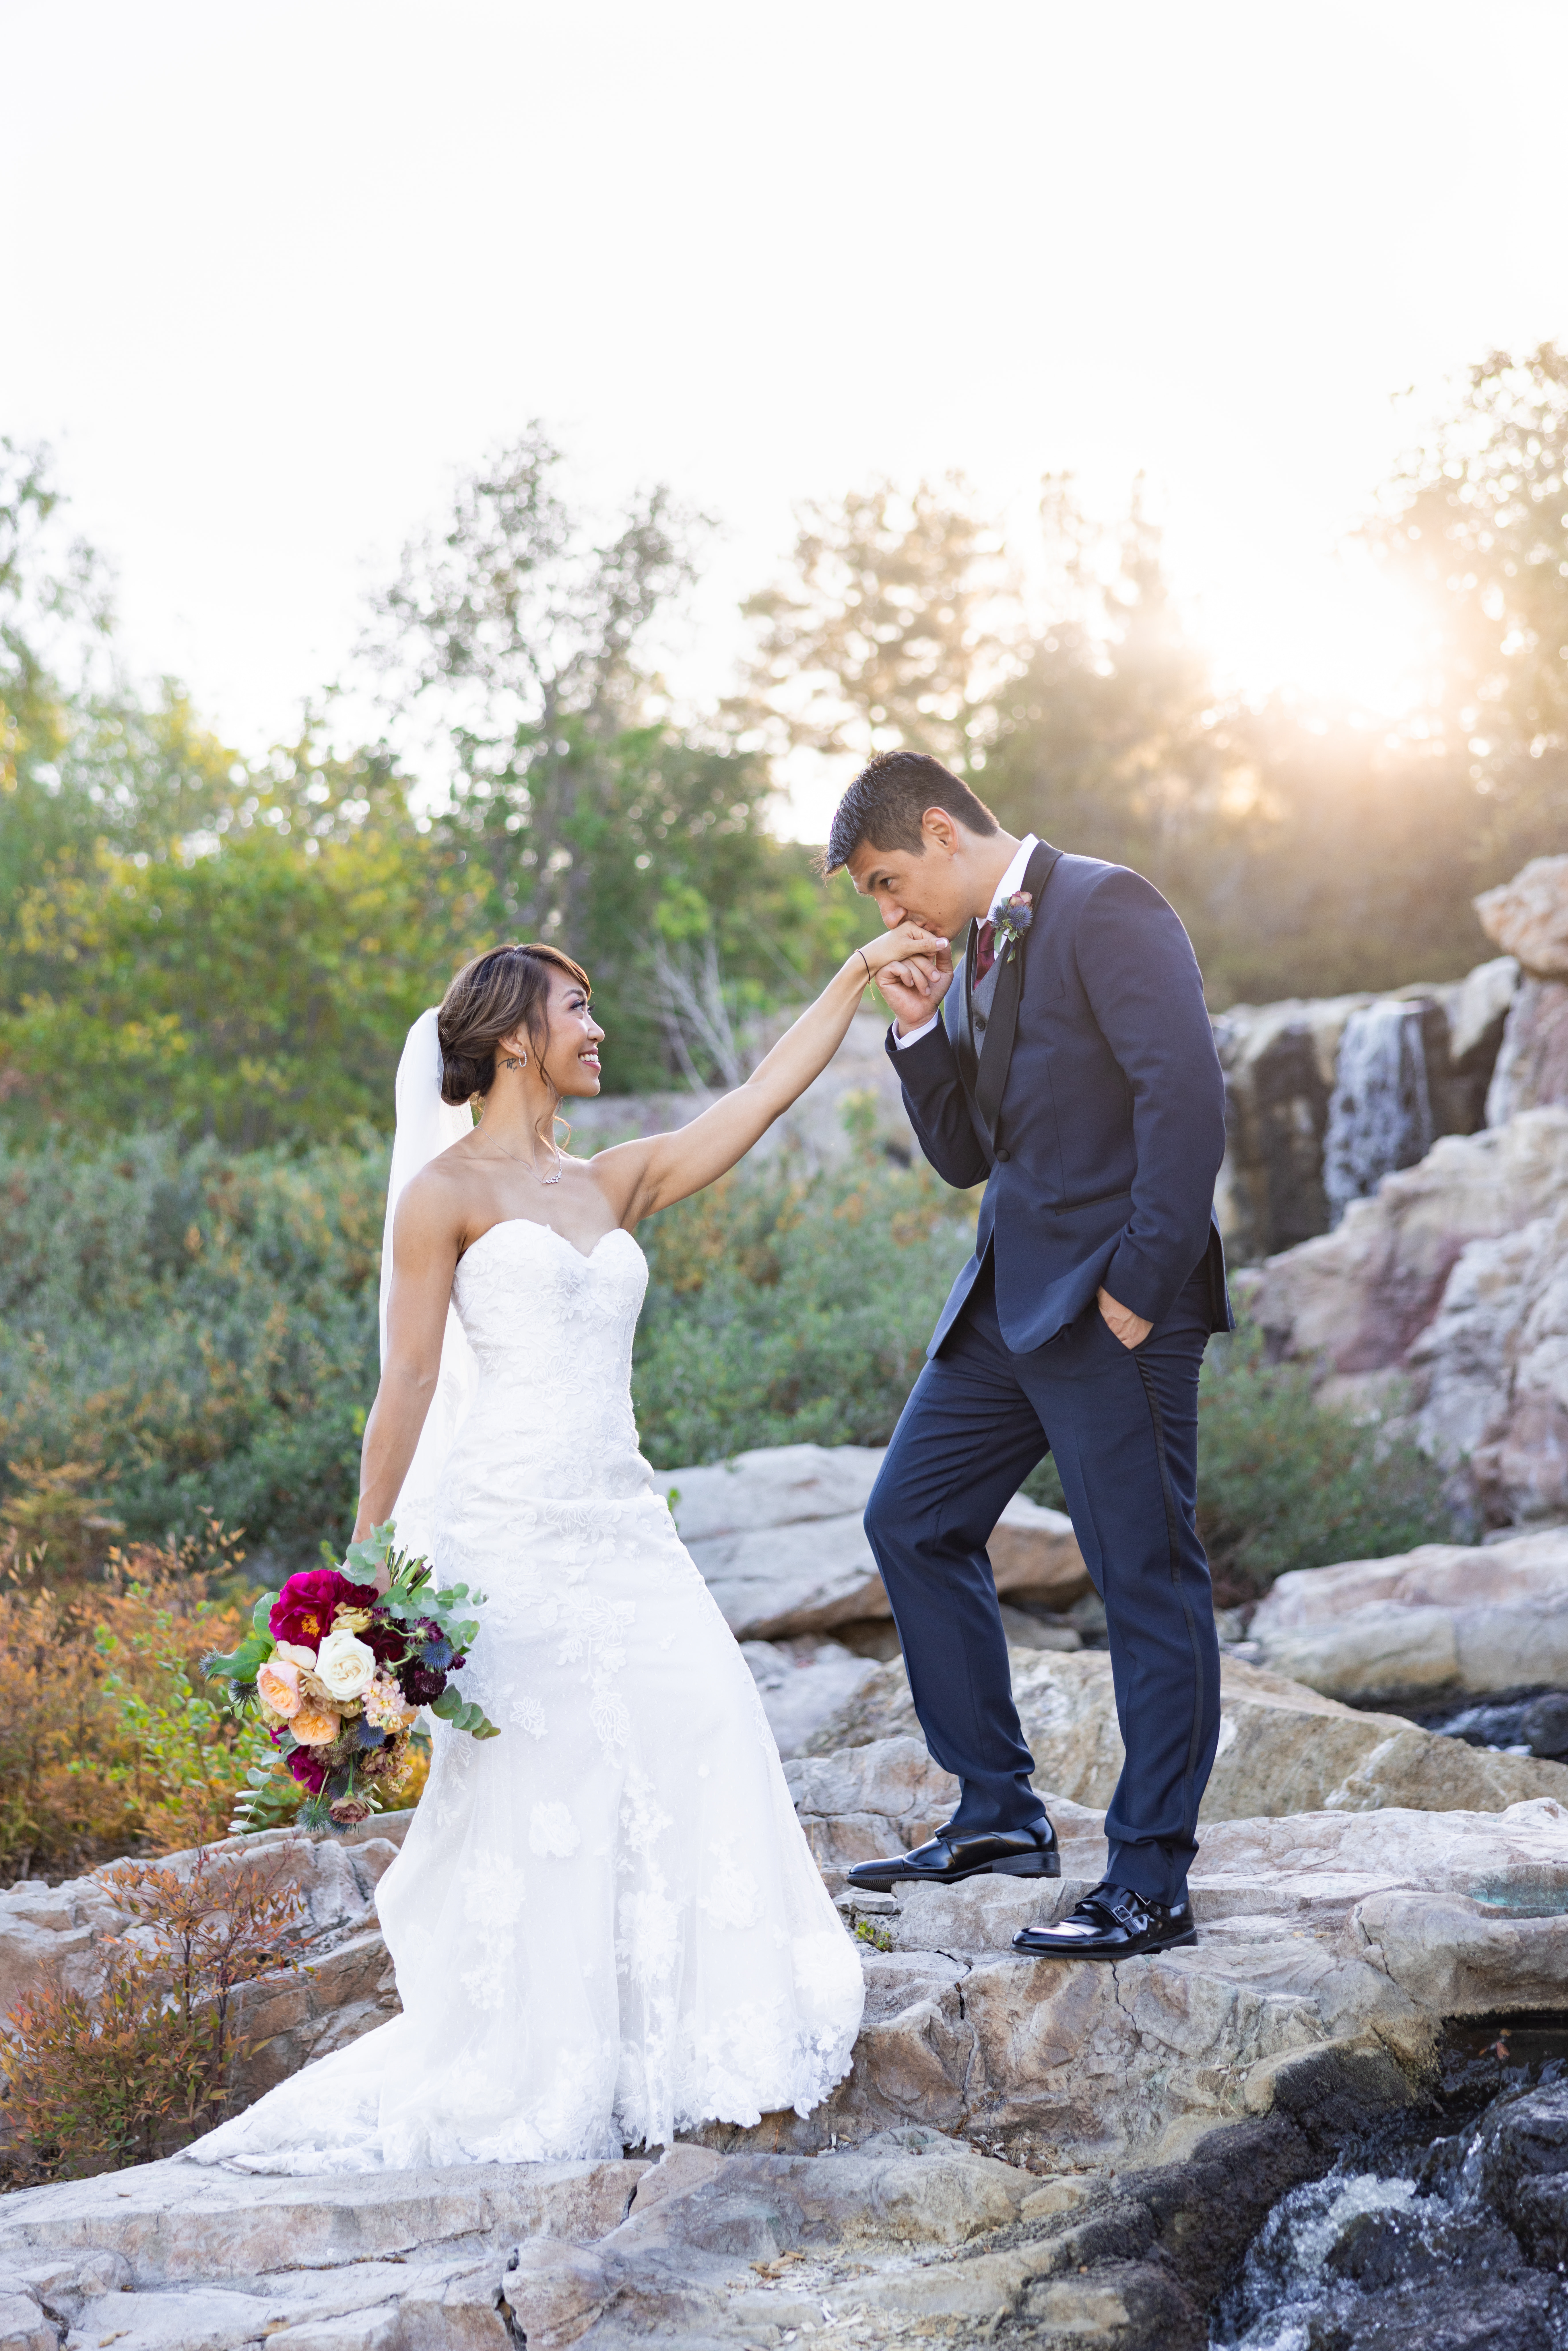 bride in strapless lace wedding dress and groom in navy tuxedo take outdoor sunset portrait photos by waterfall at Dove Canyon Golf Club